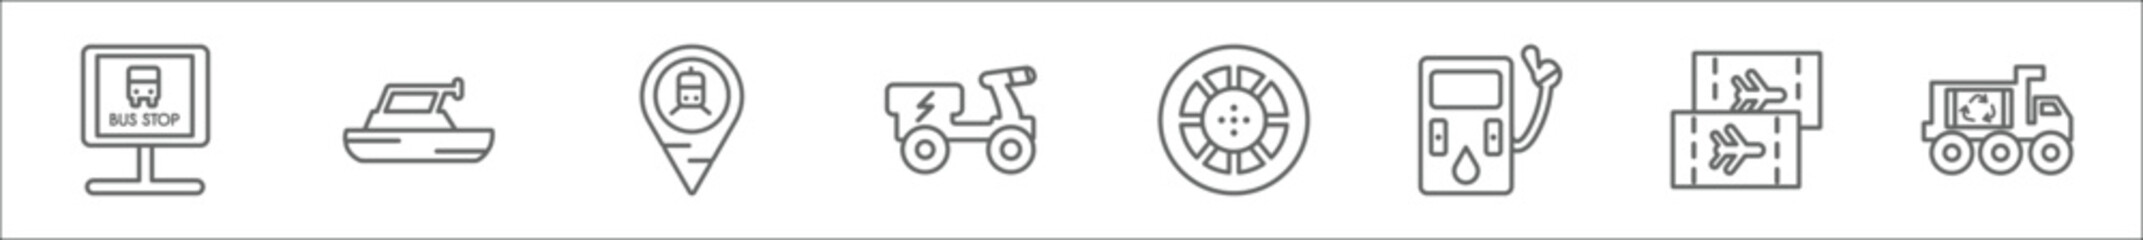 outline set of transport line icons. linear vector icons such as school bus stop, yacht navigate, tram stop, scooter bike, alloy wheel, petrol station, plane tickets, recycling truck